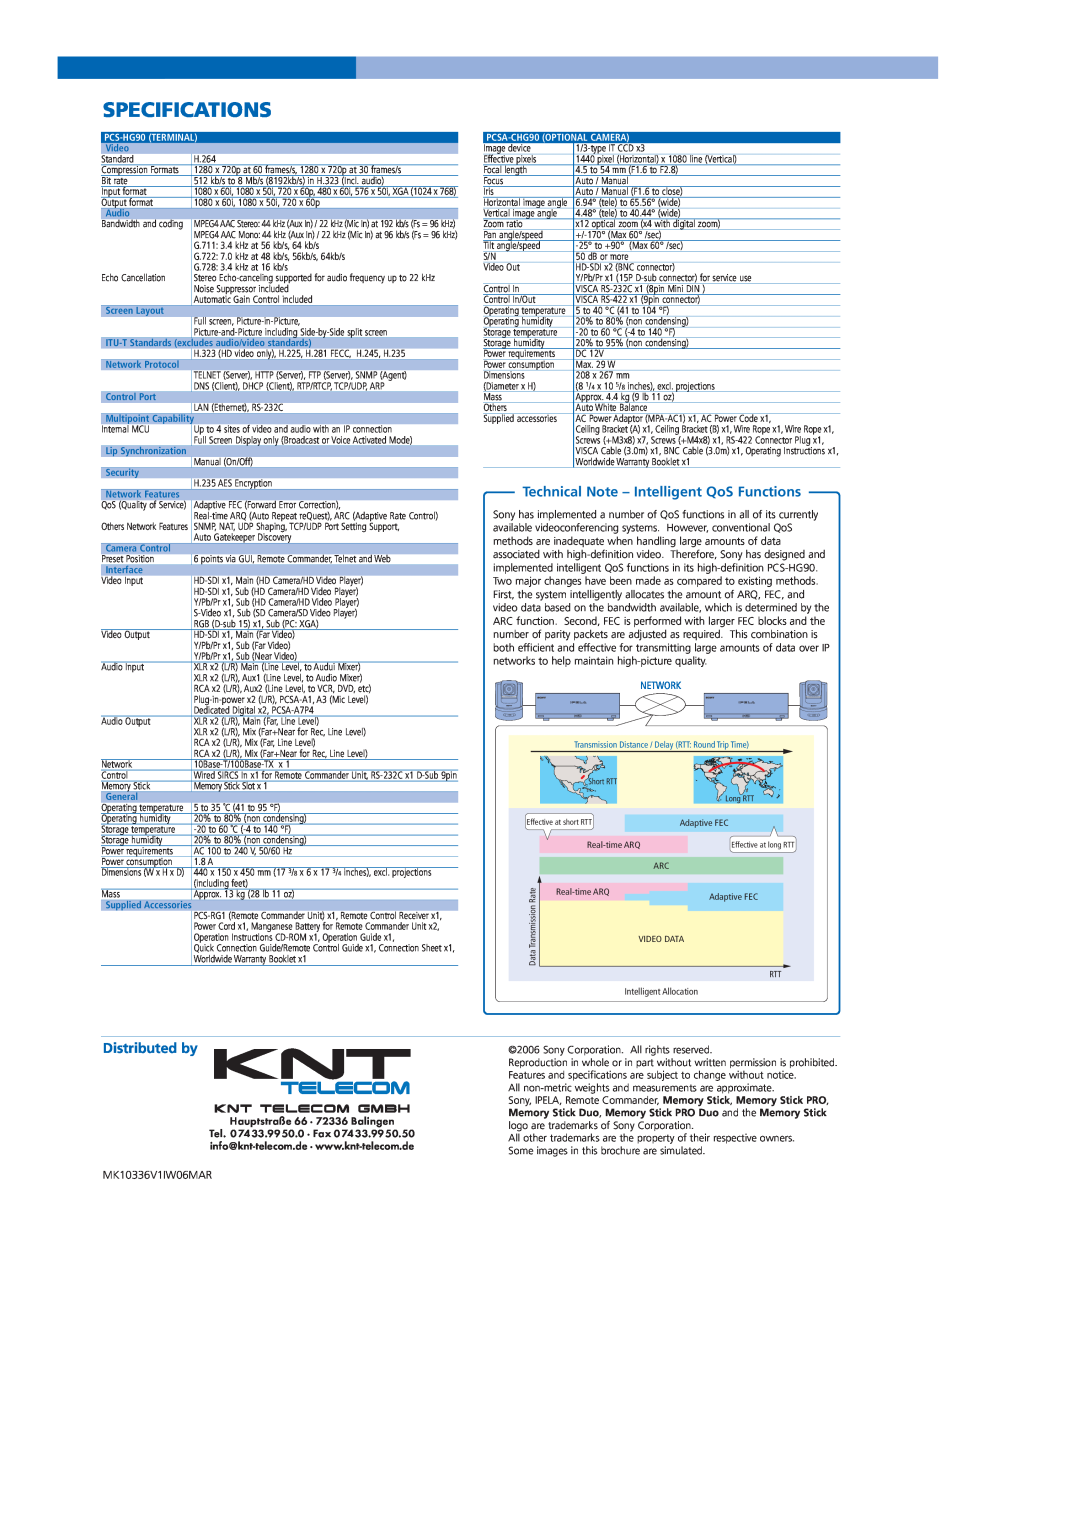 Sony PCS-HG90 manual Specifications, Technical Note - Intelligent QoS Functions, Distributed by, MK10336V1IW06MAR, Network 